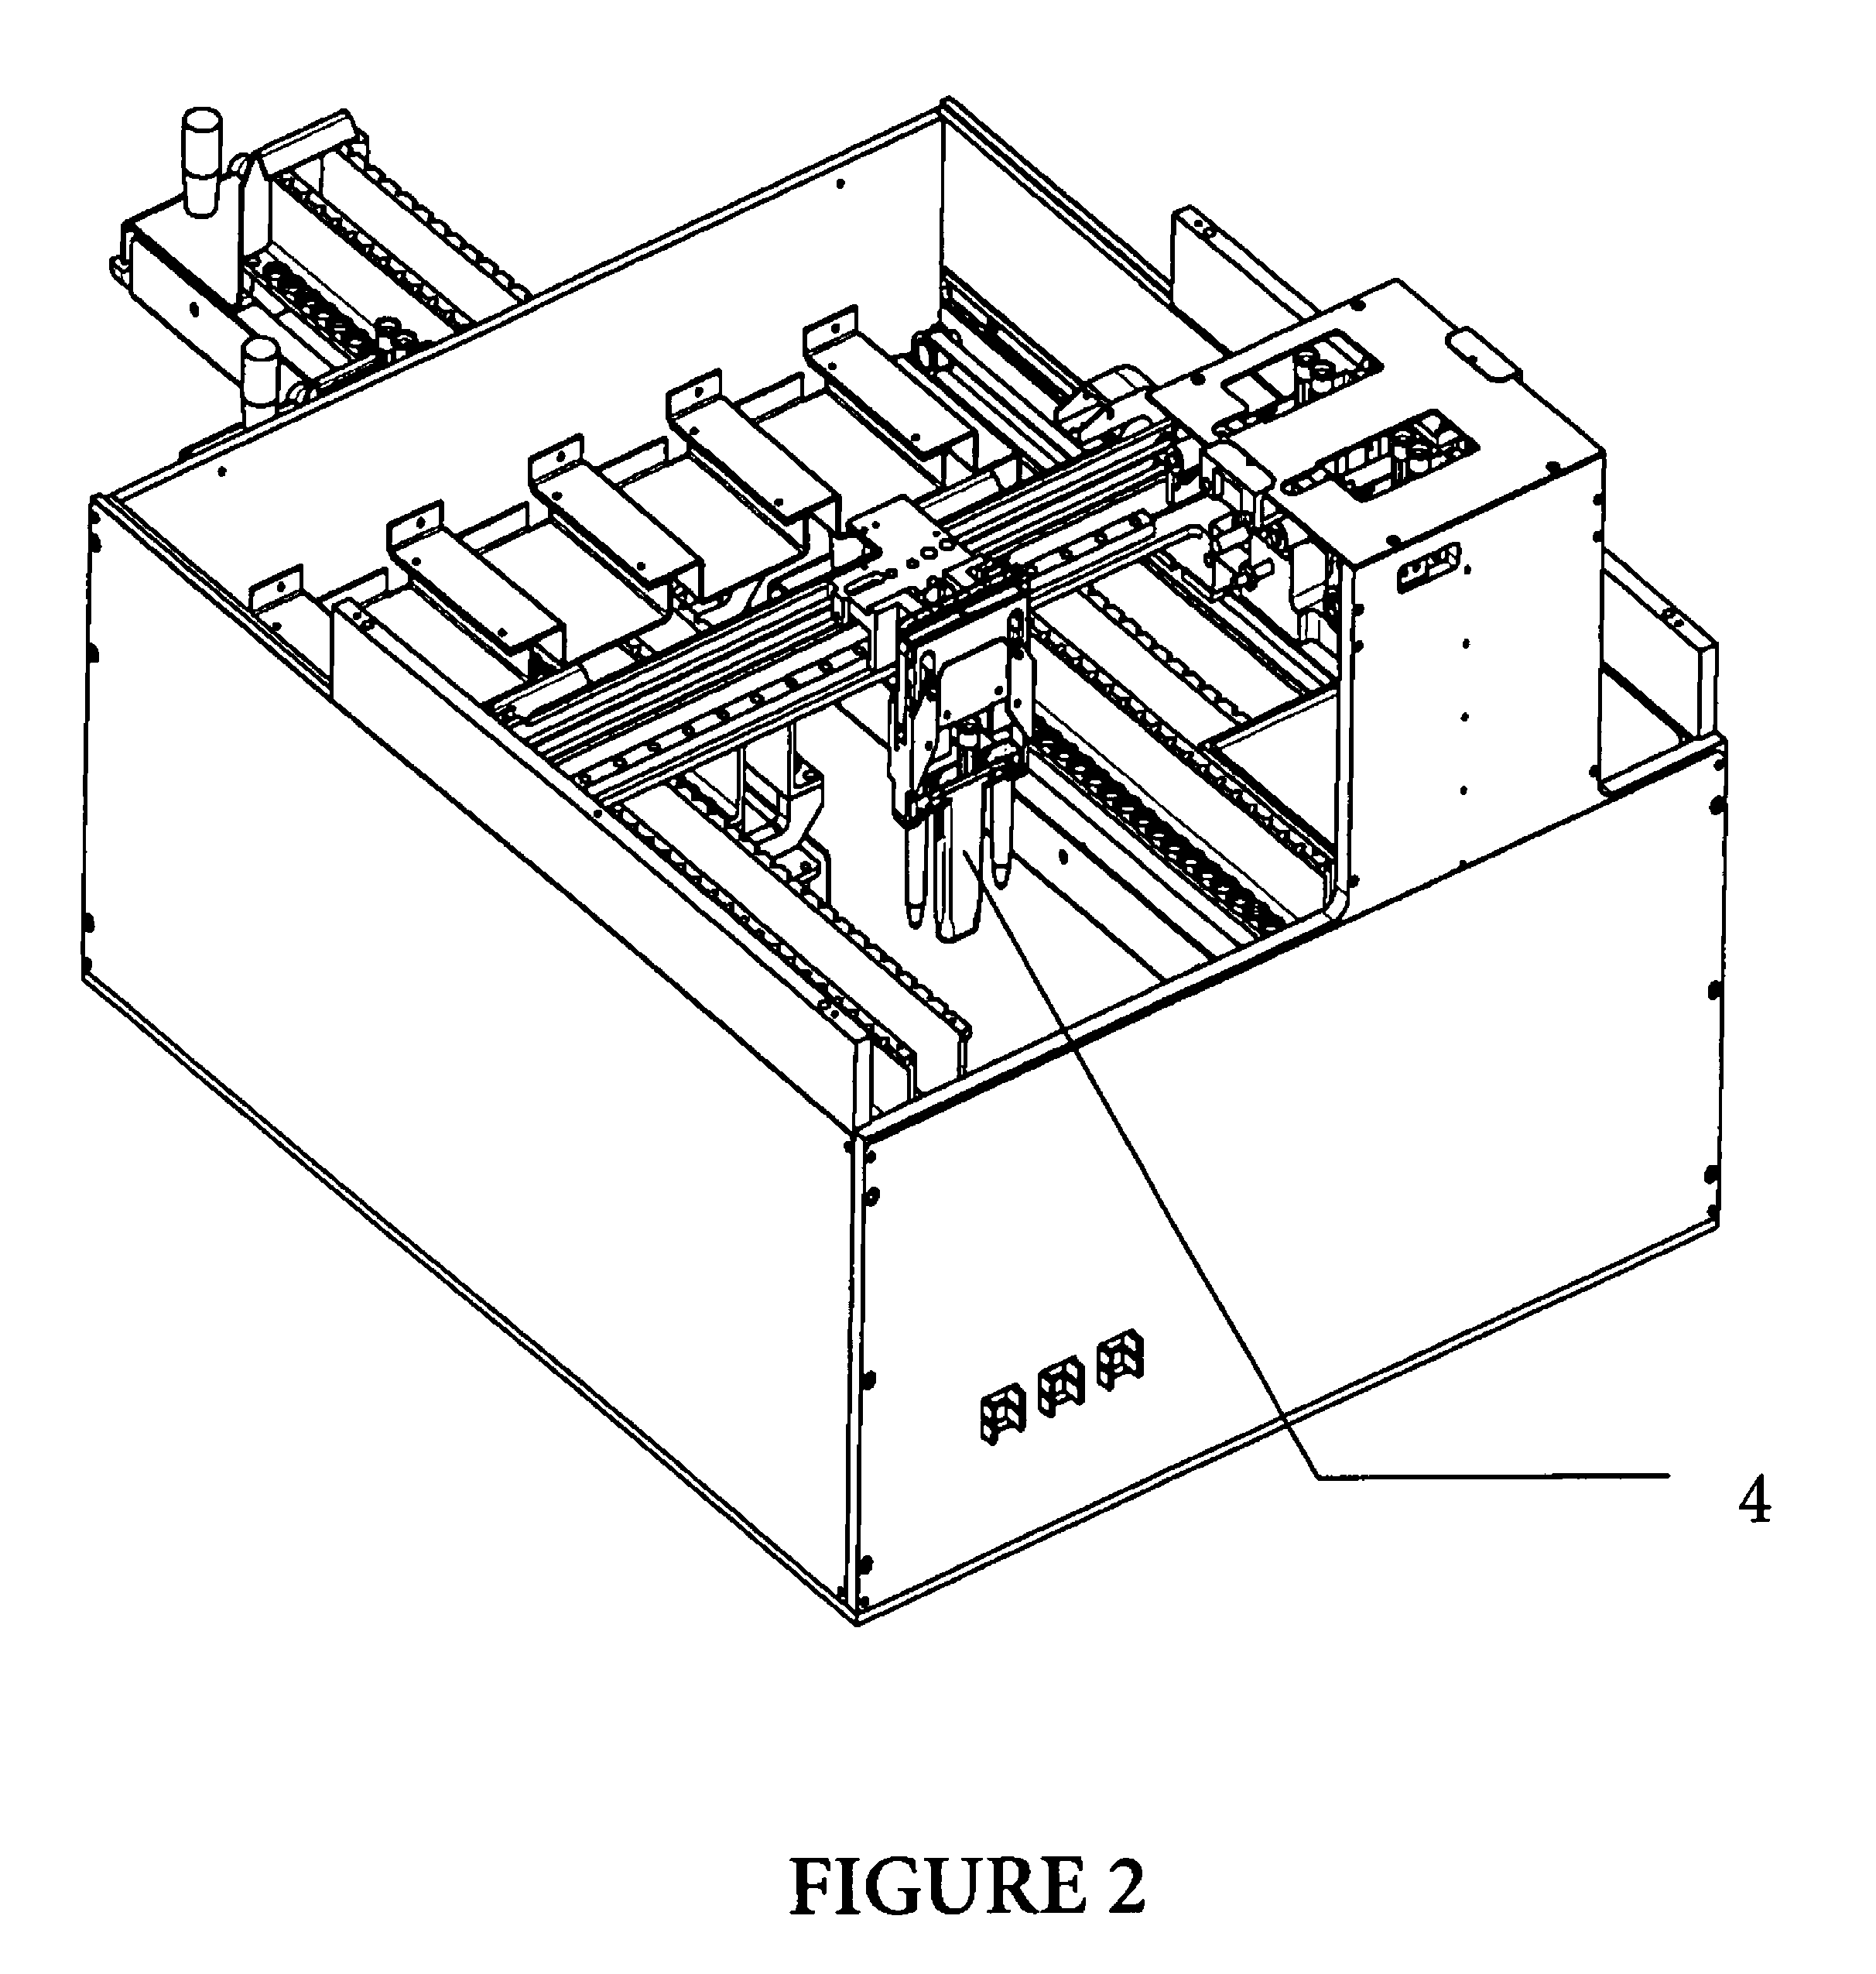 Multi-level diagnostic apparatus with a lift system